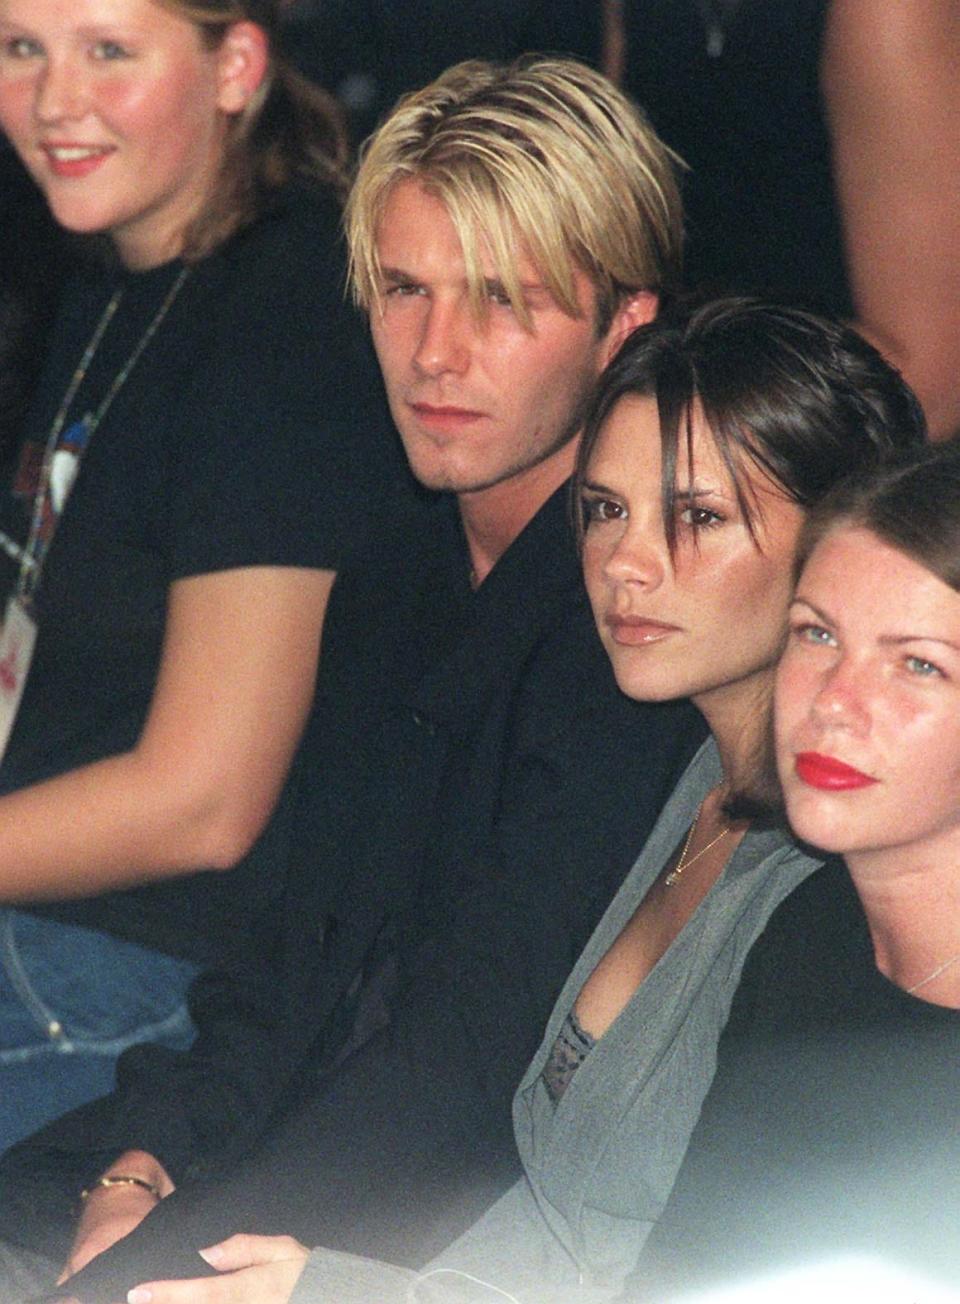 Victoria and David Beckham attend a London Fashion Week show on September 25, 1998.